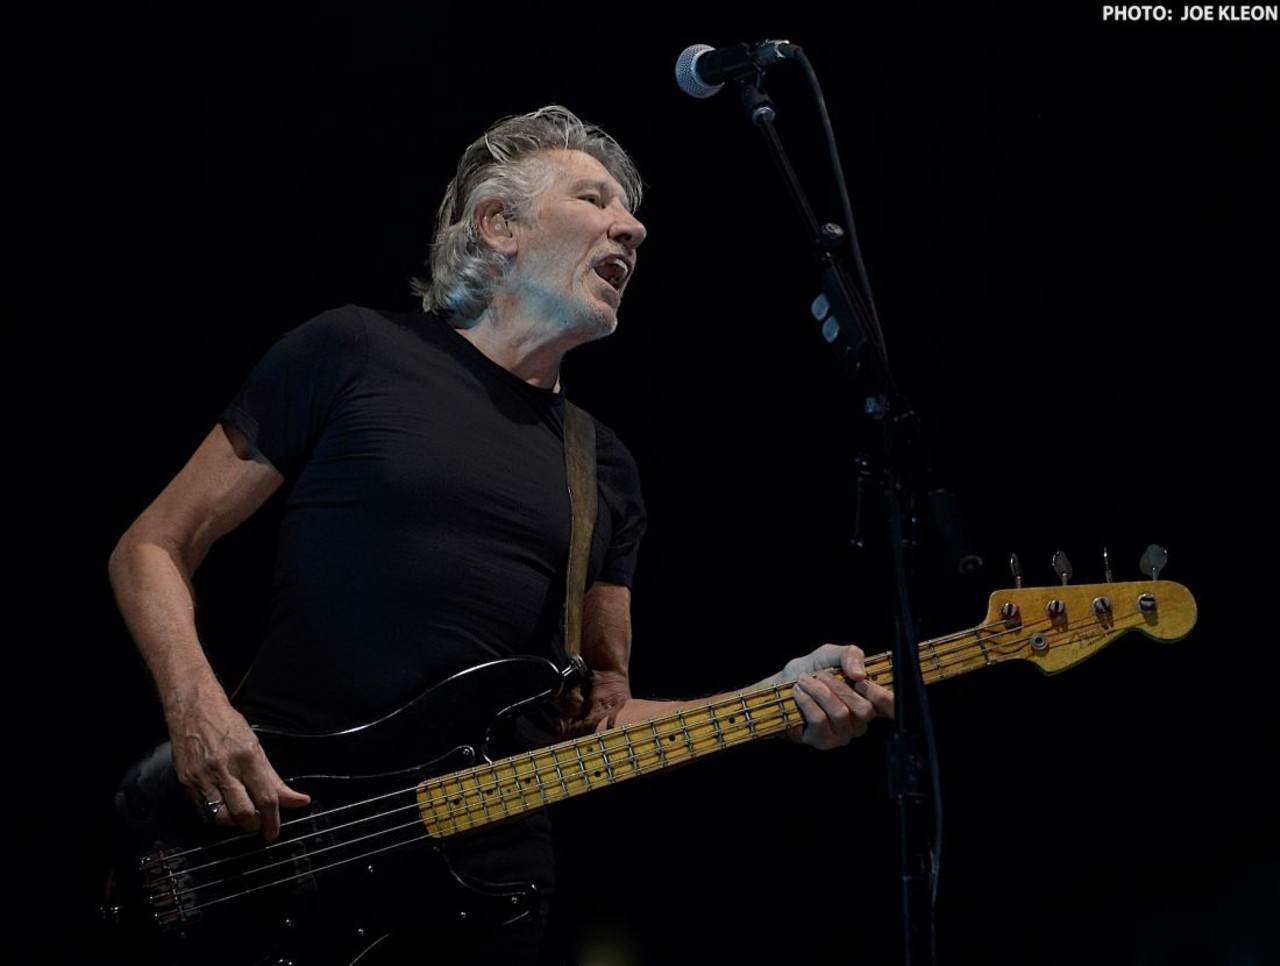 Roger Waters Performing at Quicken Loans Arena